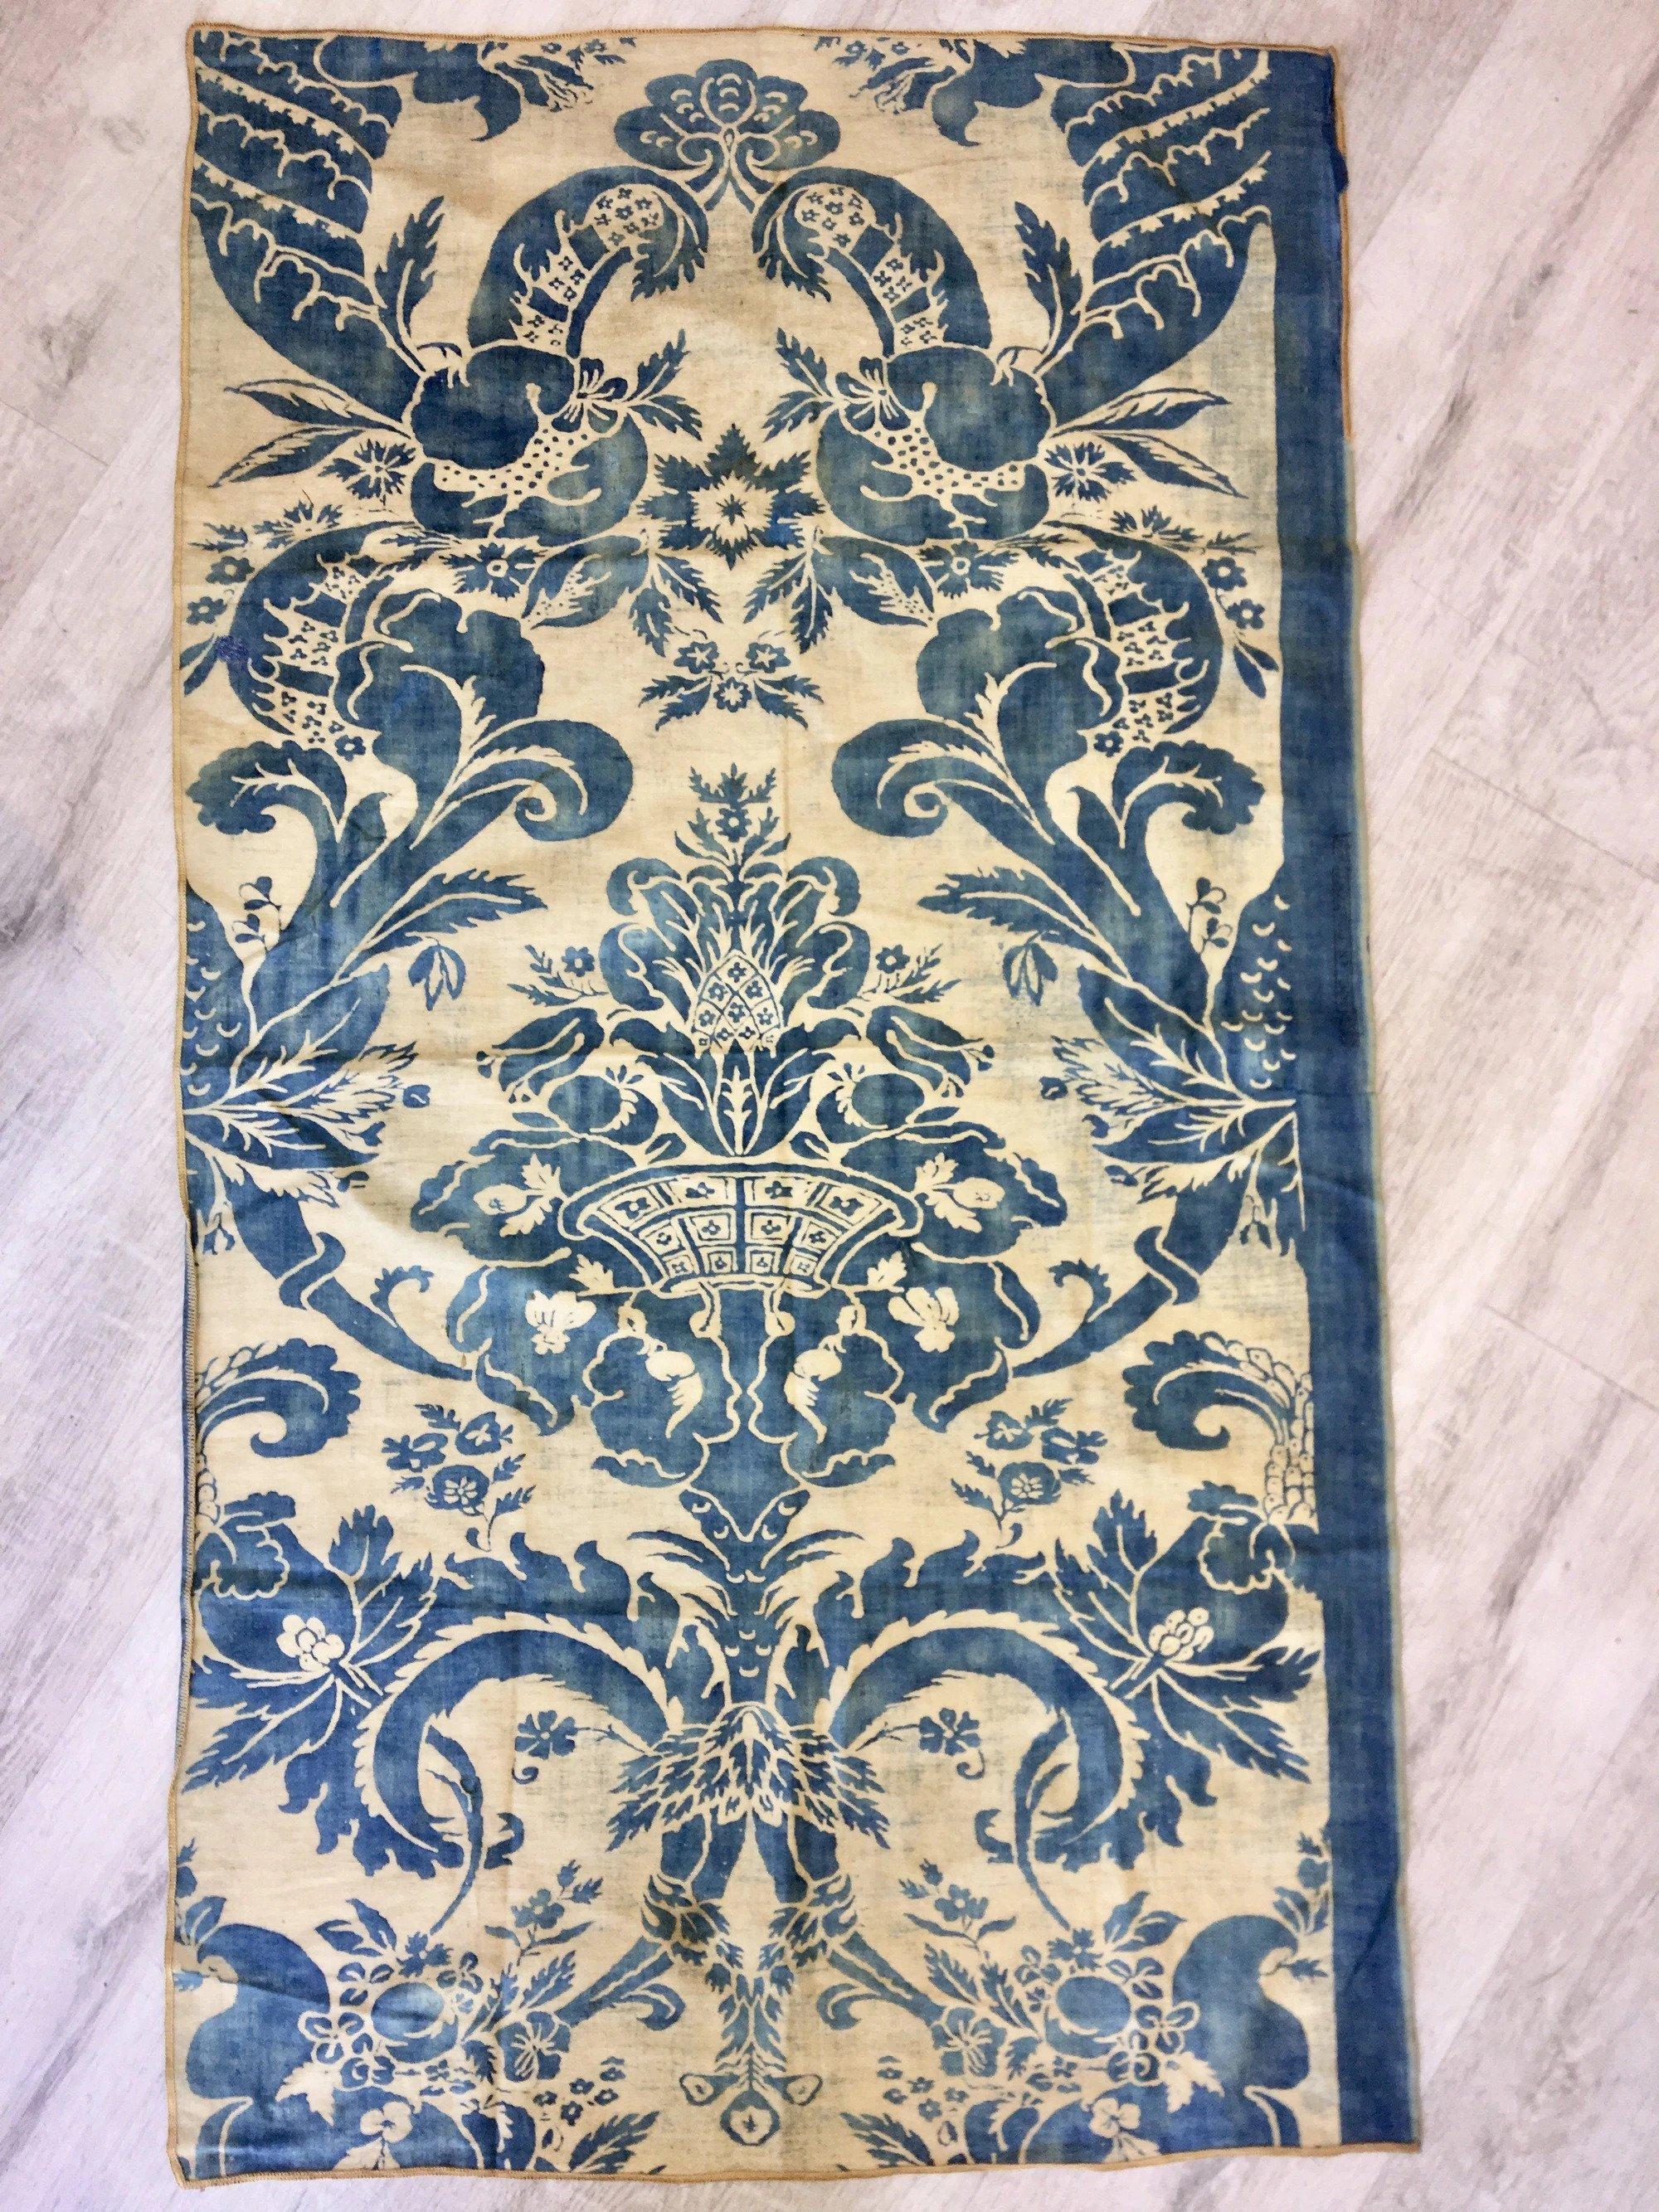 Vintage piece of Venetian Fortuny fabric, indigo turquoise tones, over a gold/yellow field, Fine cotton, some small repairs to reverse (see photos) early mid-20th century.